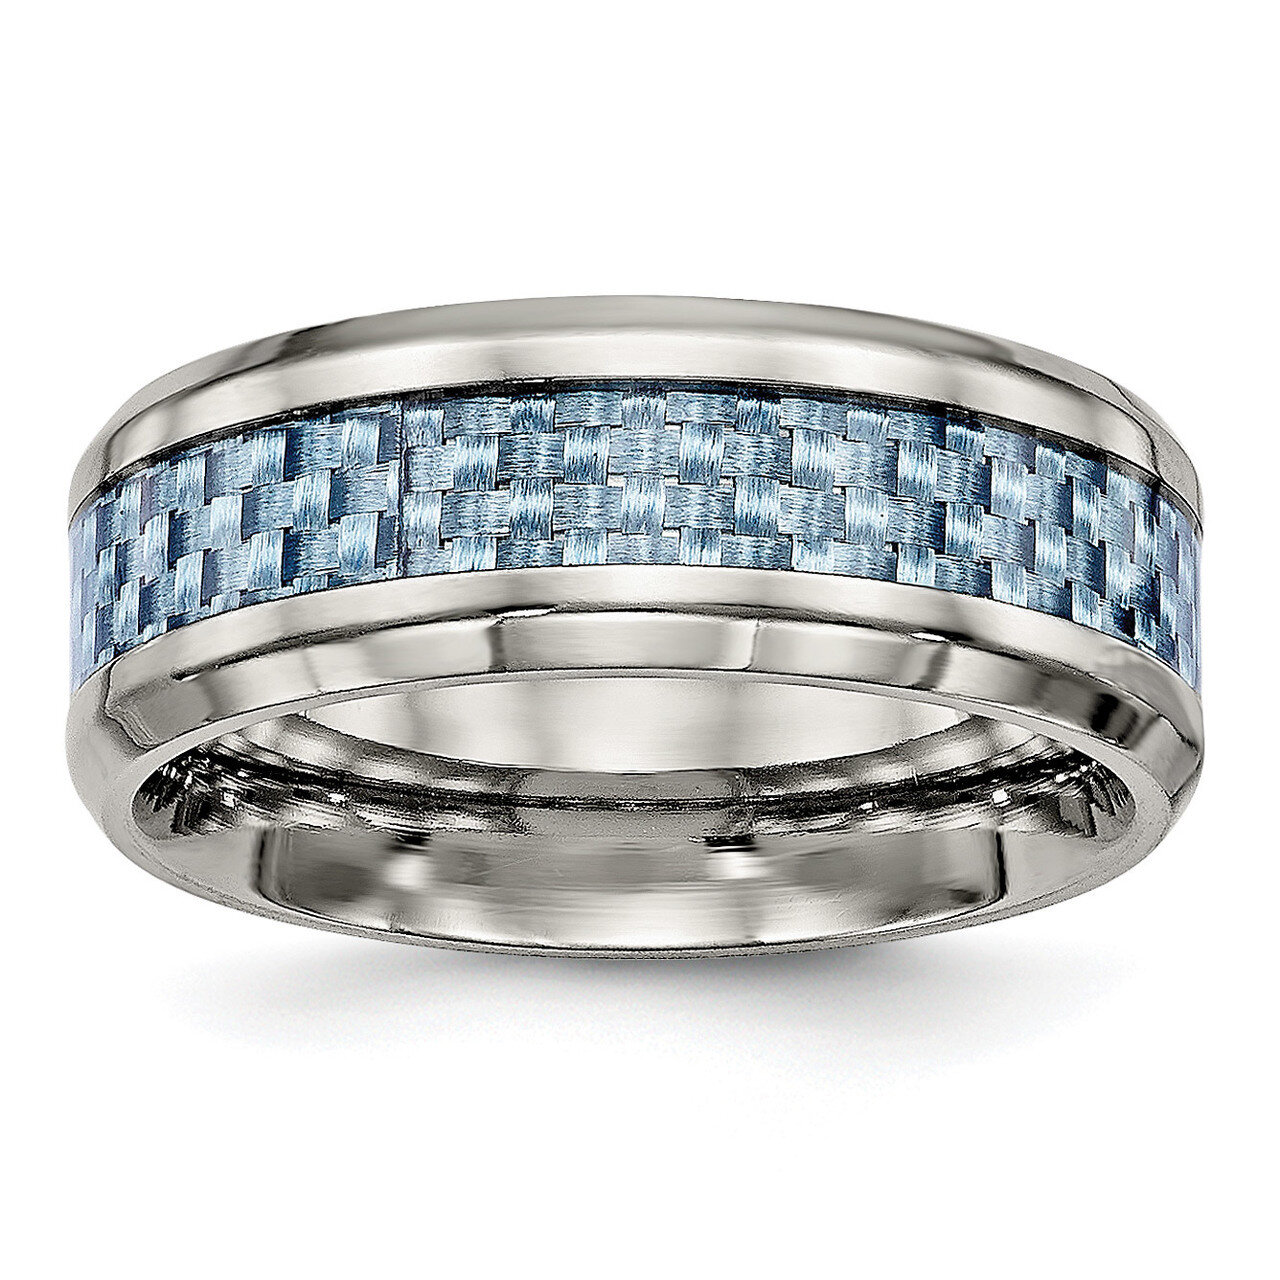 Blue Carbon Fiber Inlay Ring Stainless Steel Polished SR501